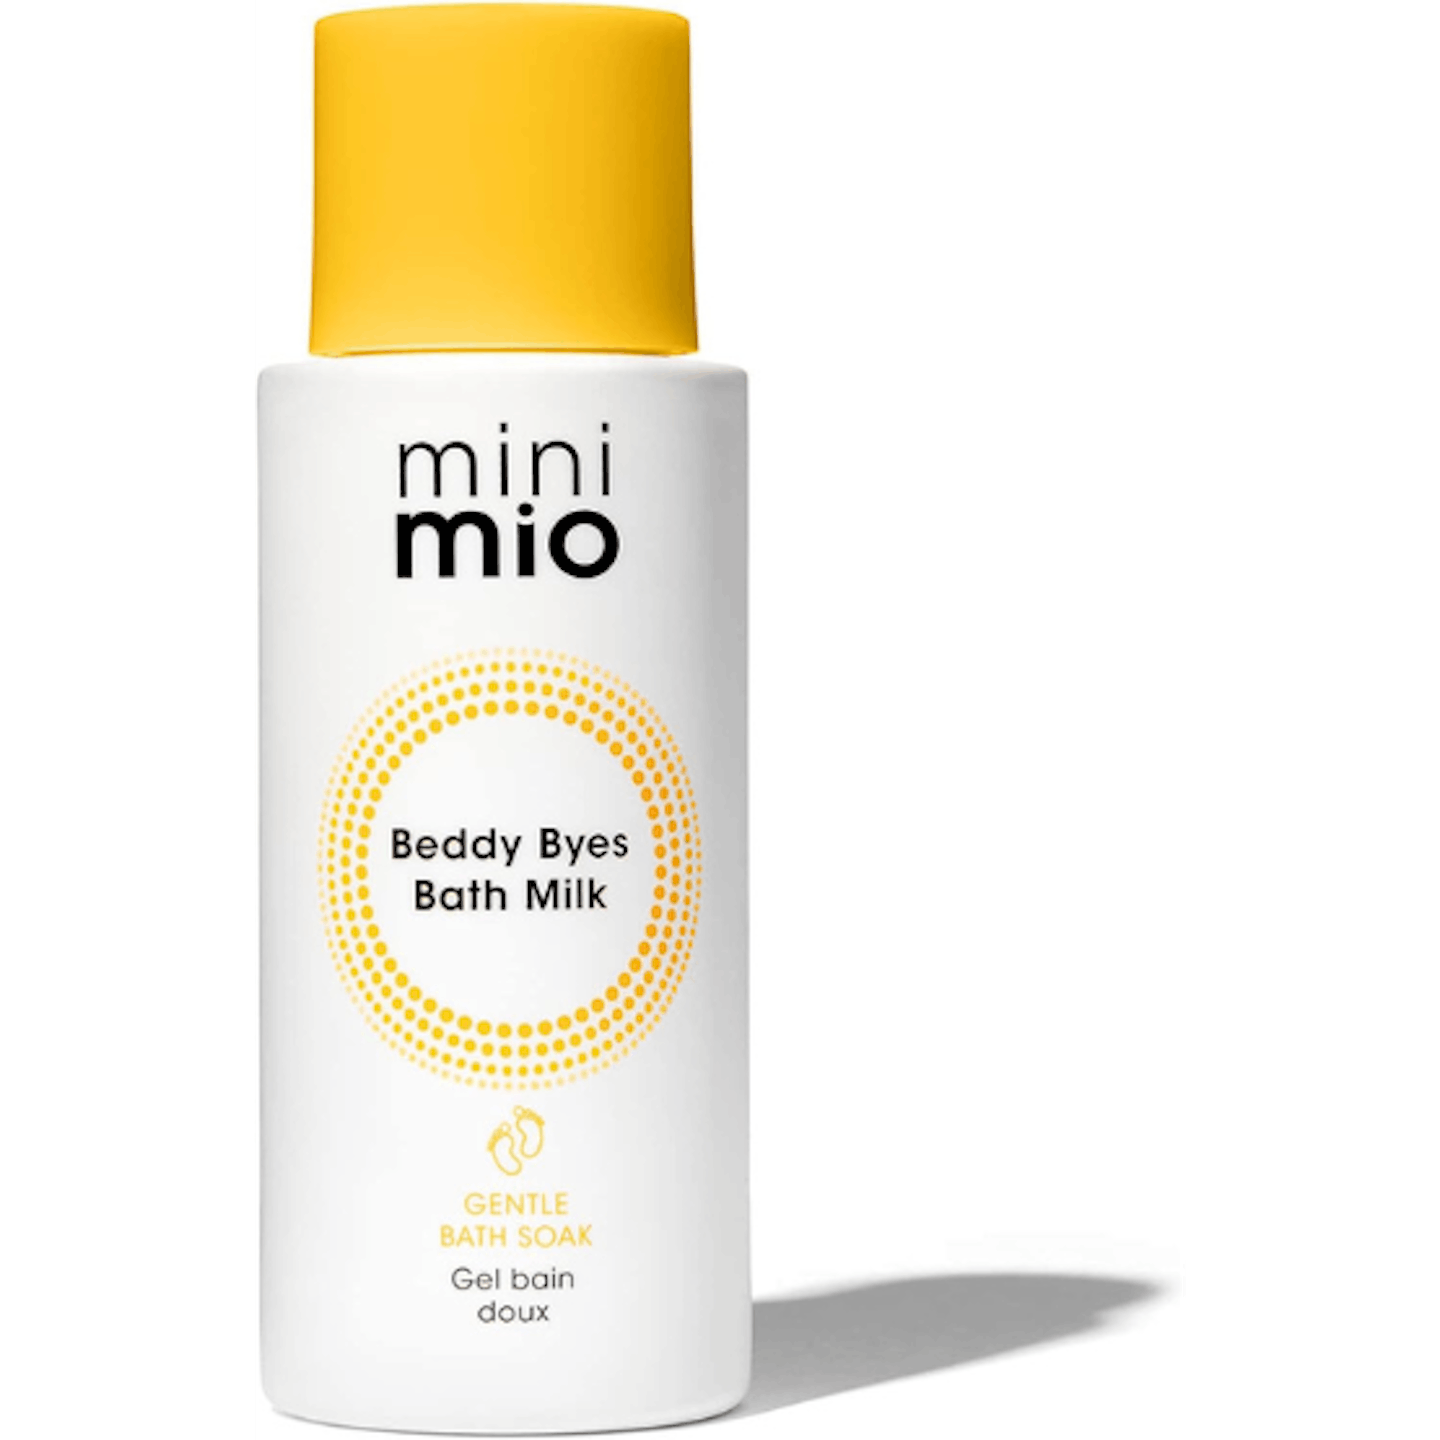 Laura Anderson best baby buys Mini Mio